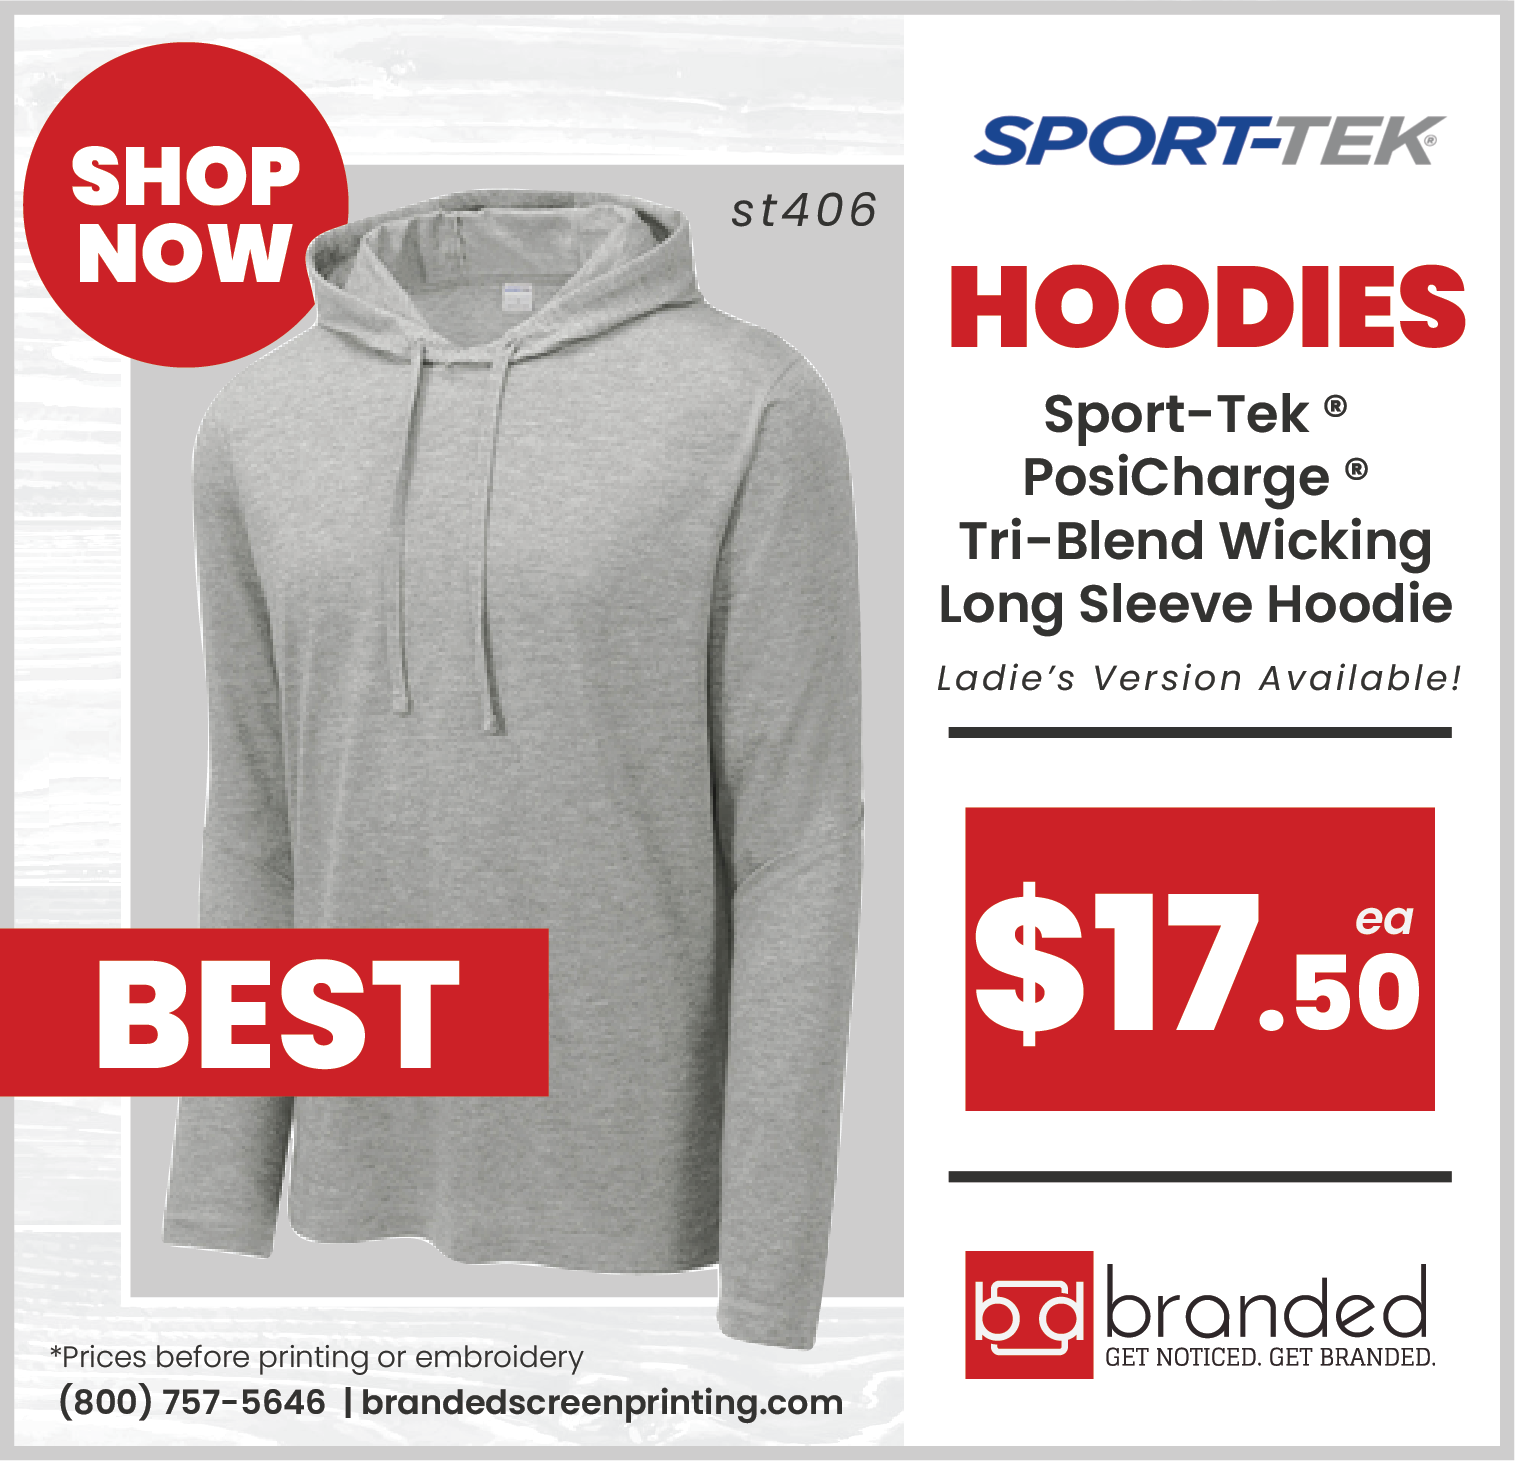 Branded has customizable hooded long sleeves from Sport-Tek at a great price custom screen printing